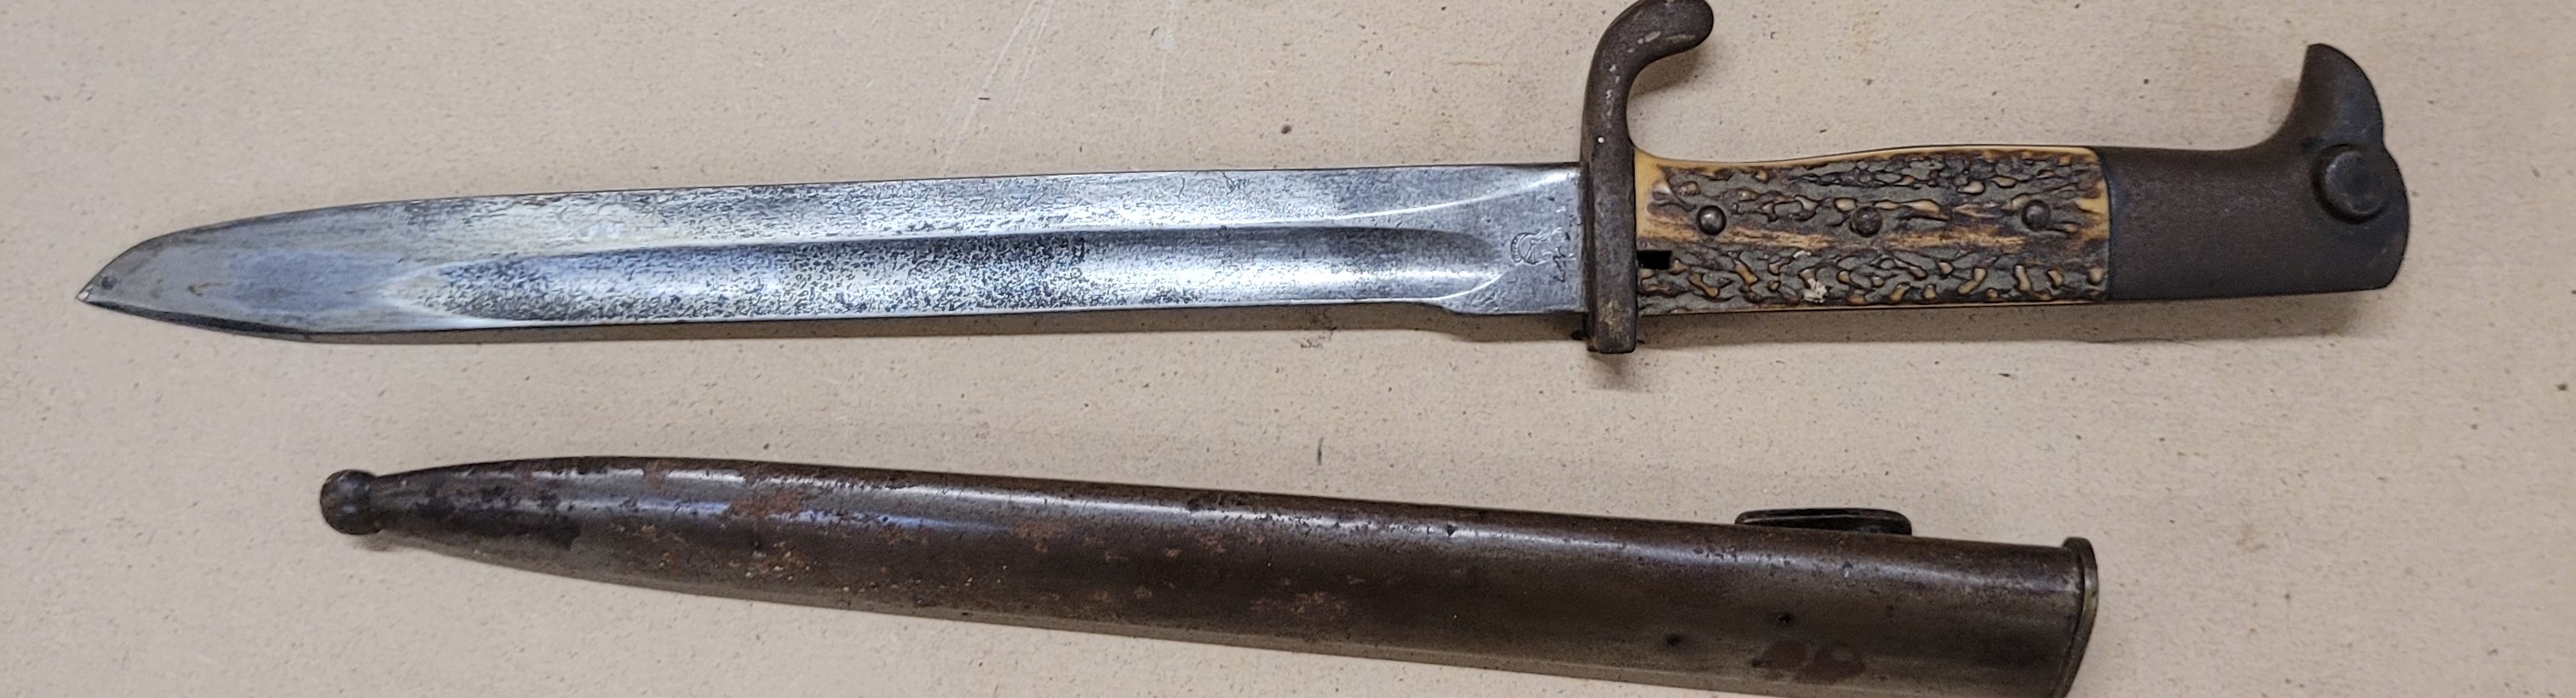 A bayonet with antler handle and scabbard - Image 2 of 3